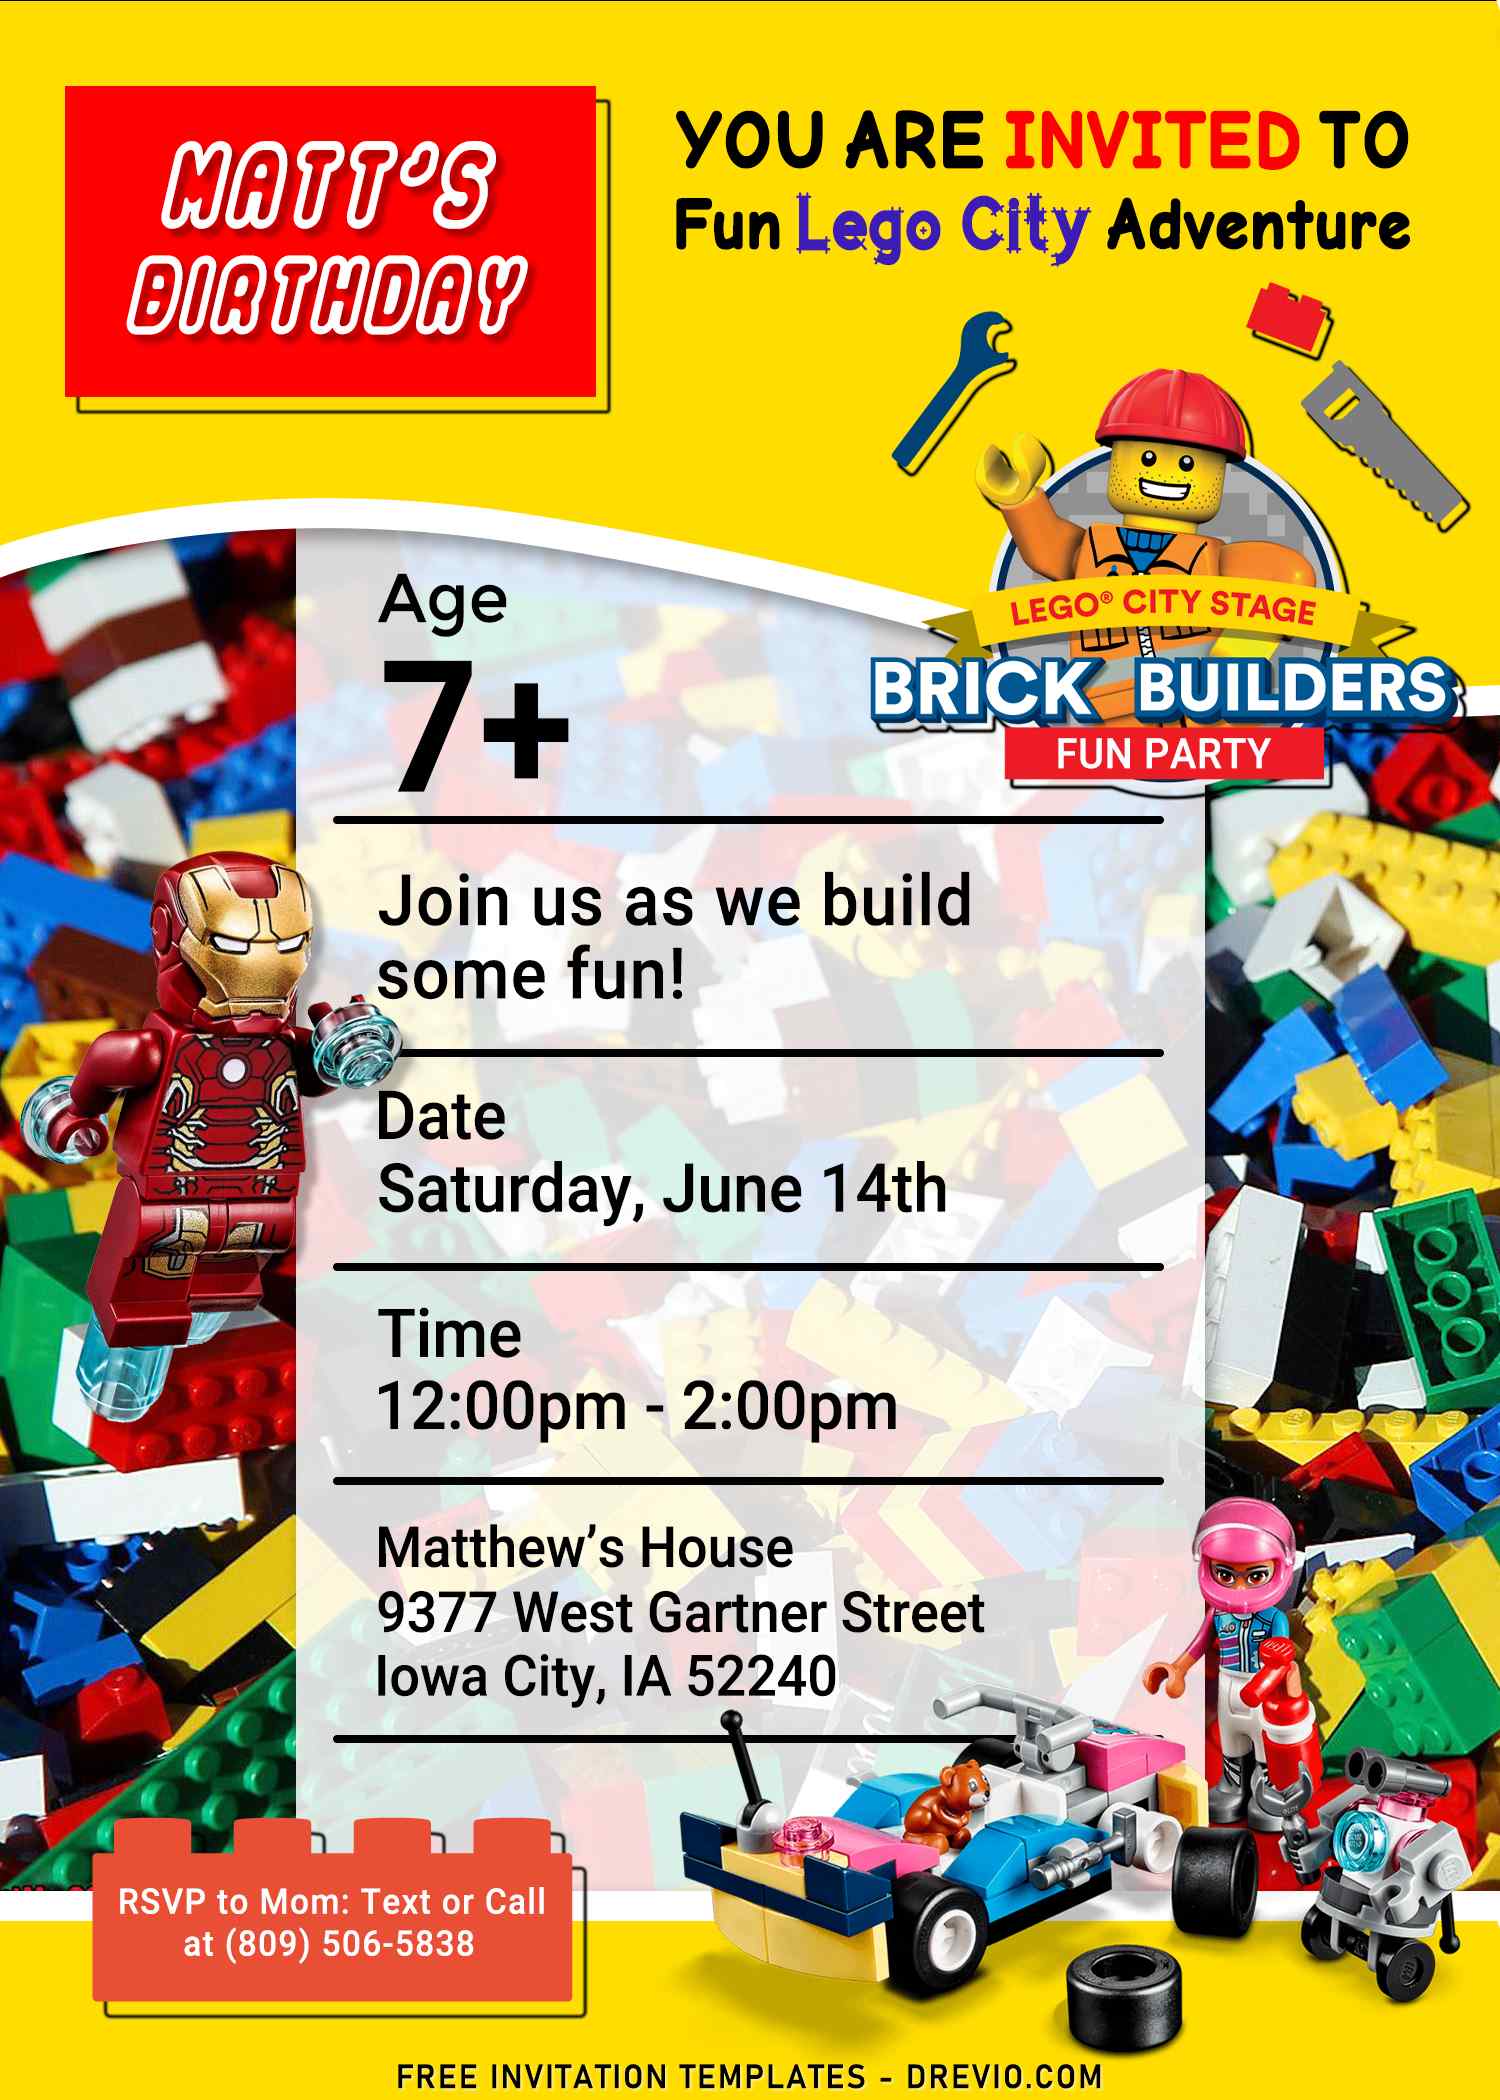 9-lego-birthday-invitation-templates-for-kids-birthday-party-download-hundreds-free-printable